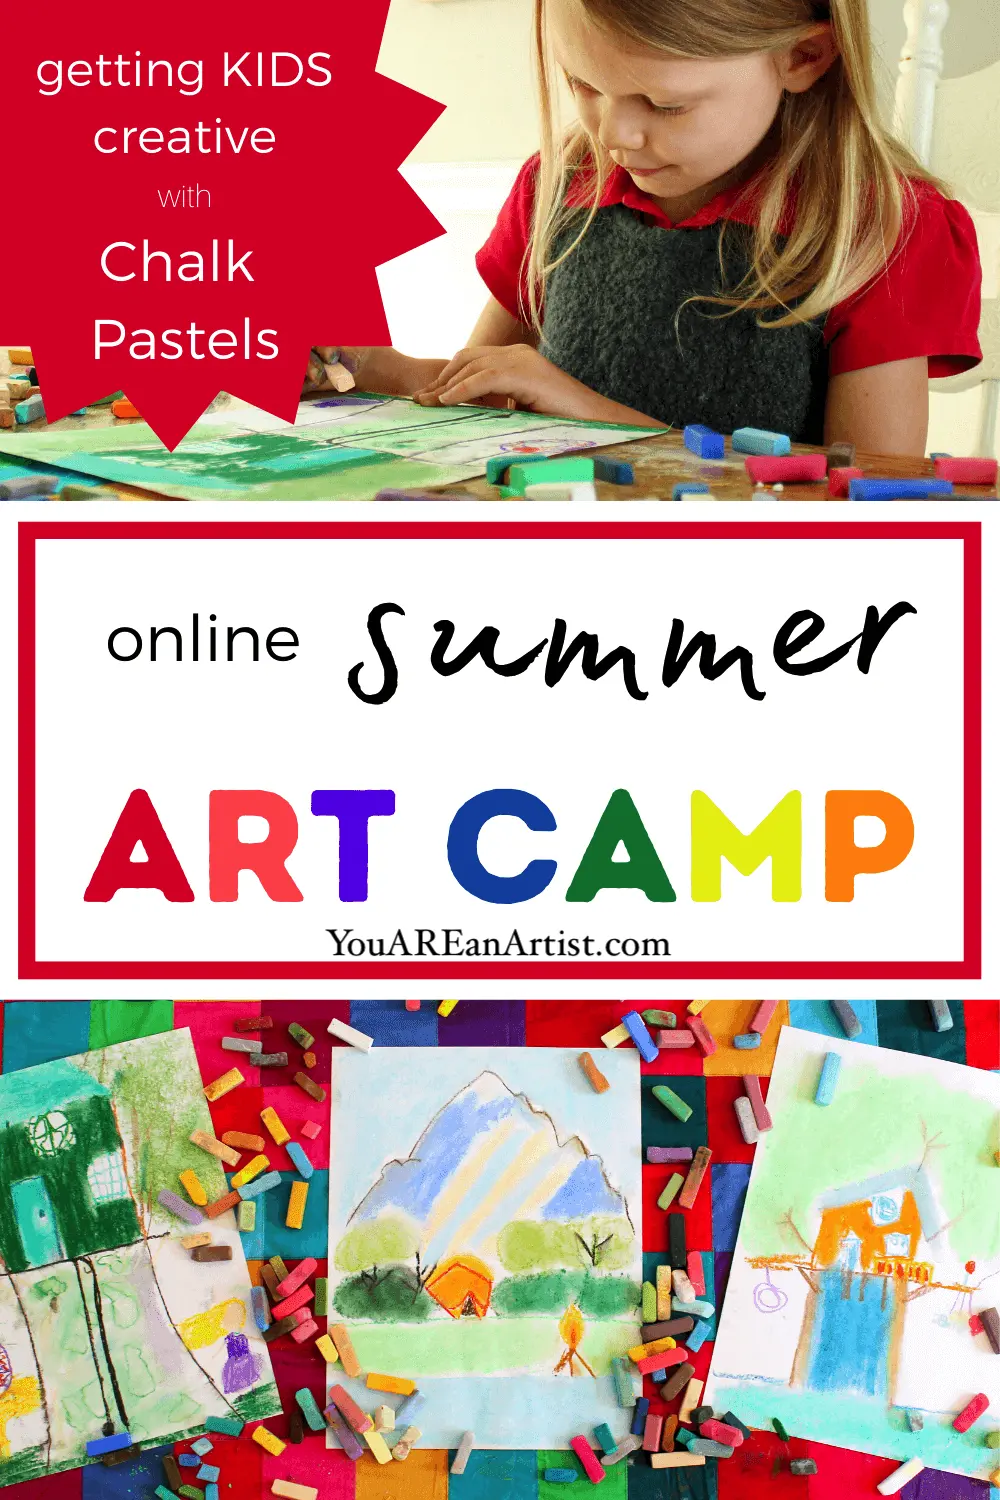 Even if you can’t get your children to a “real” summer art camp this year, I want to encourage you to explore an online camp. With the wonders of technology at our fingertips, this can be an amazing option for many families to choose from. Plus, art camp can be an easy way for kids to learn to express themselves this summer. That’s because art gives children the chance to be creative, carefree, and engaged. Your child will gain self-confidence as they develop the skills and techniques to bring their creations to fruition. No artistic talent needed. Just an openness to creative expression!